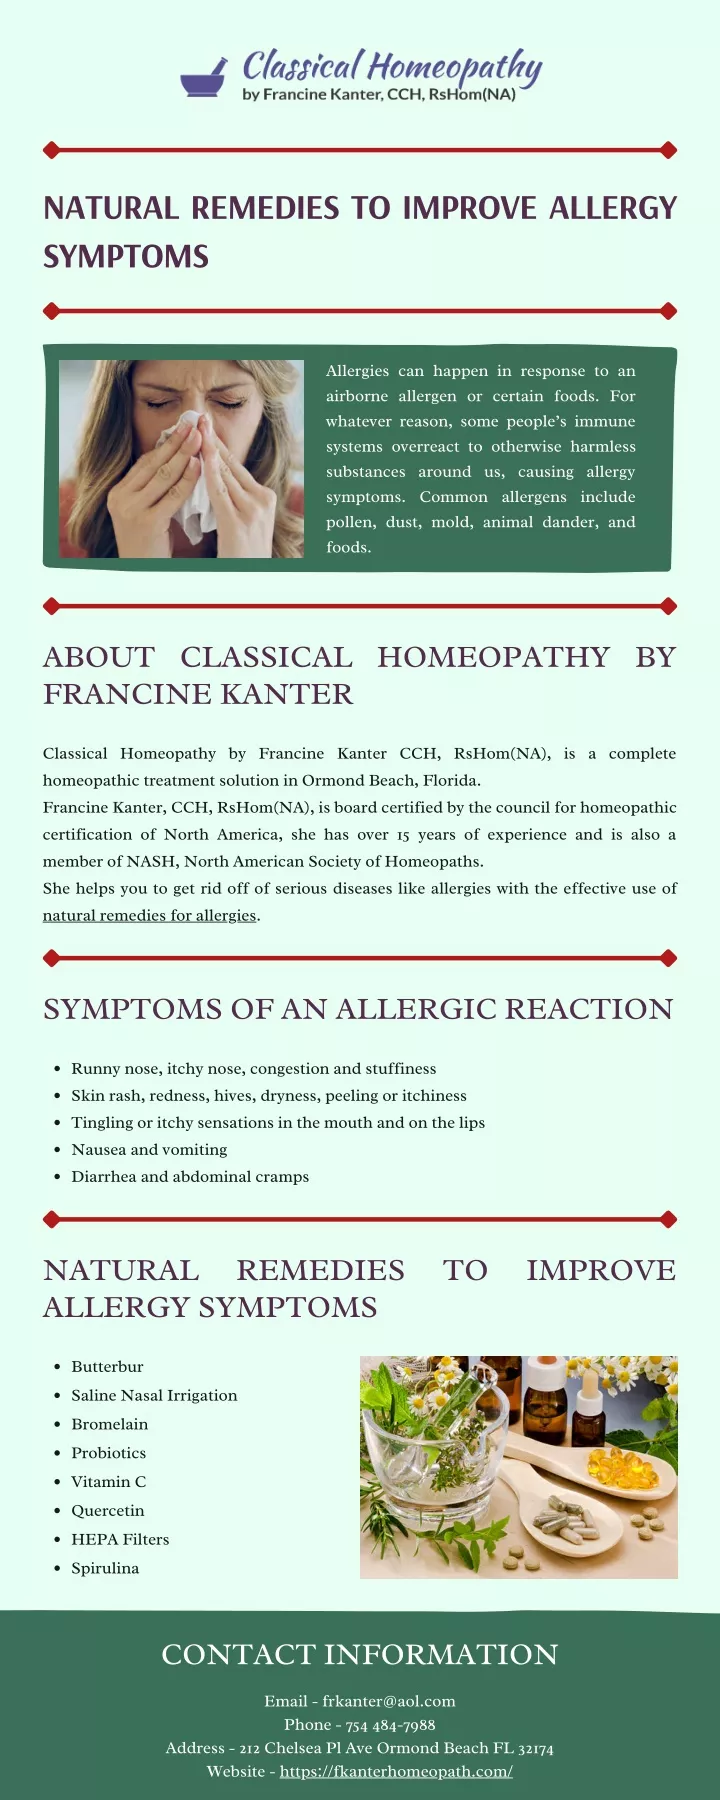 natural remedies to improve allergy symptoms